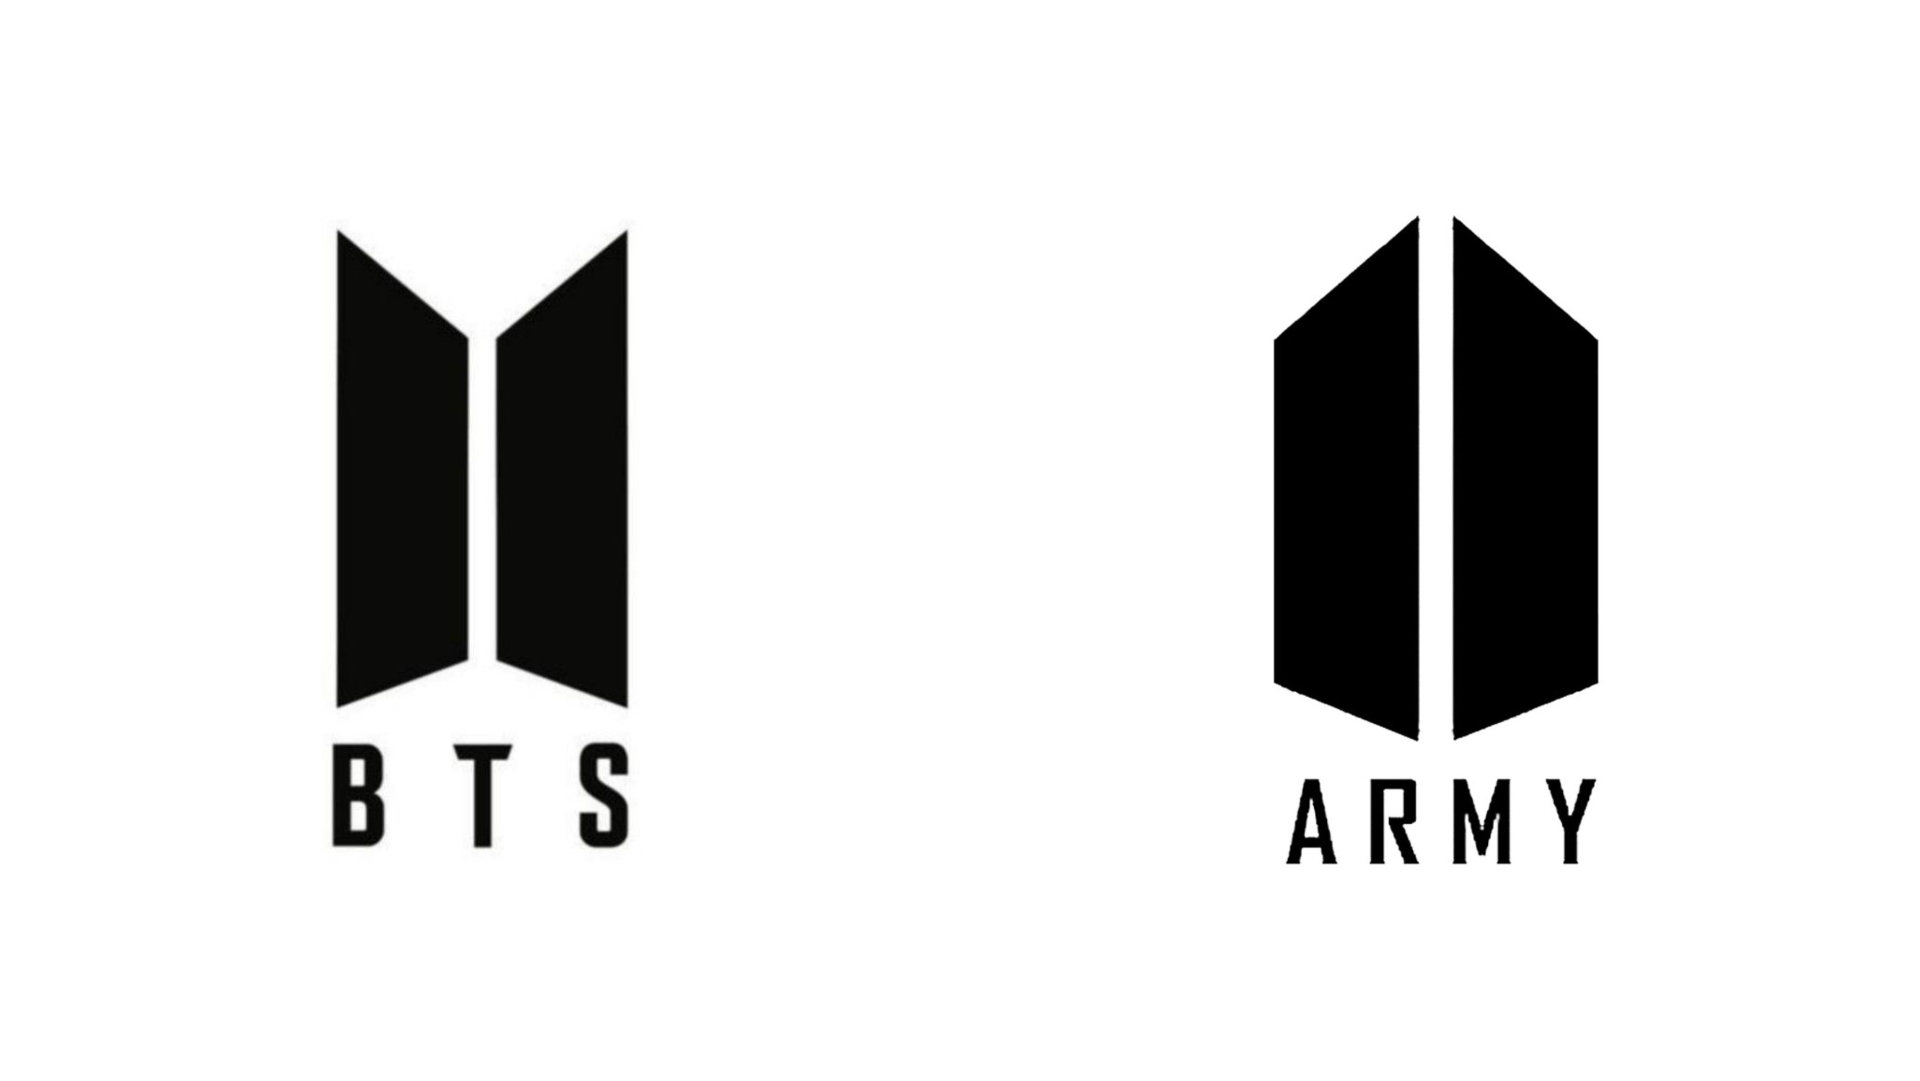 BTS and ARMY